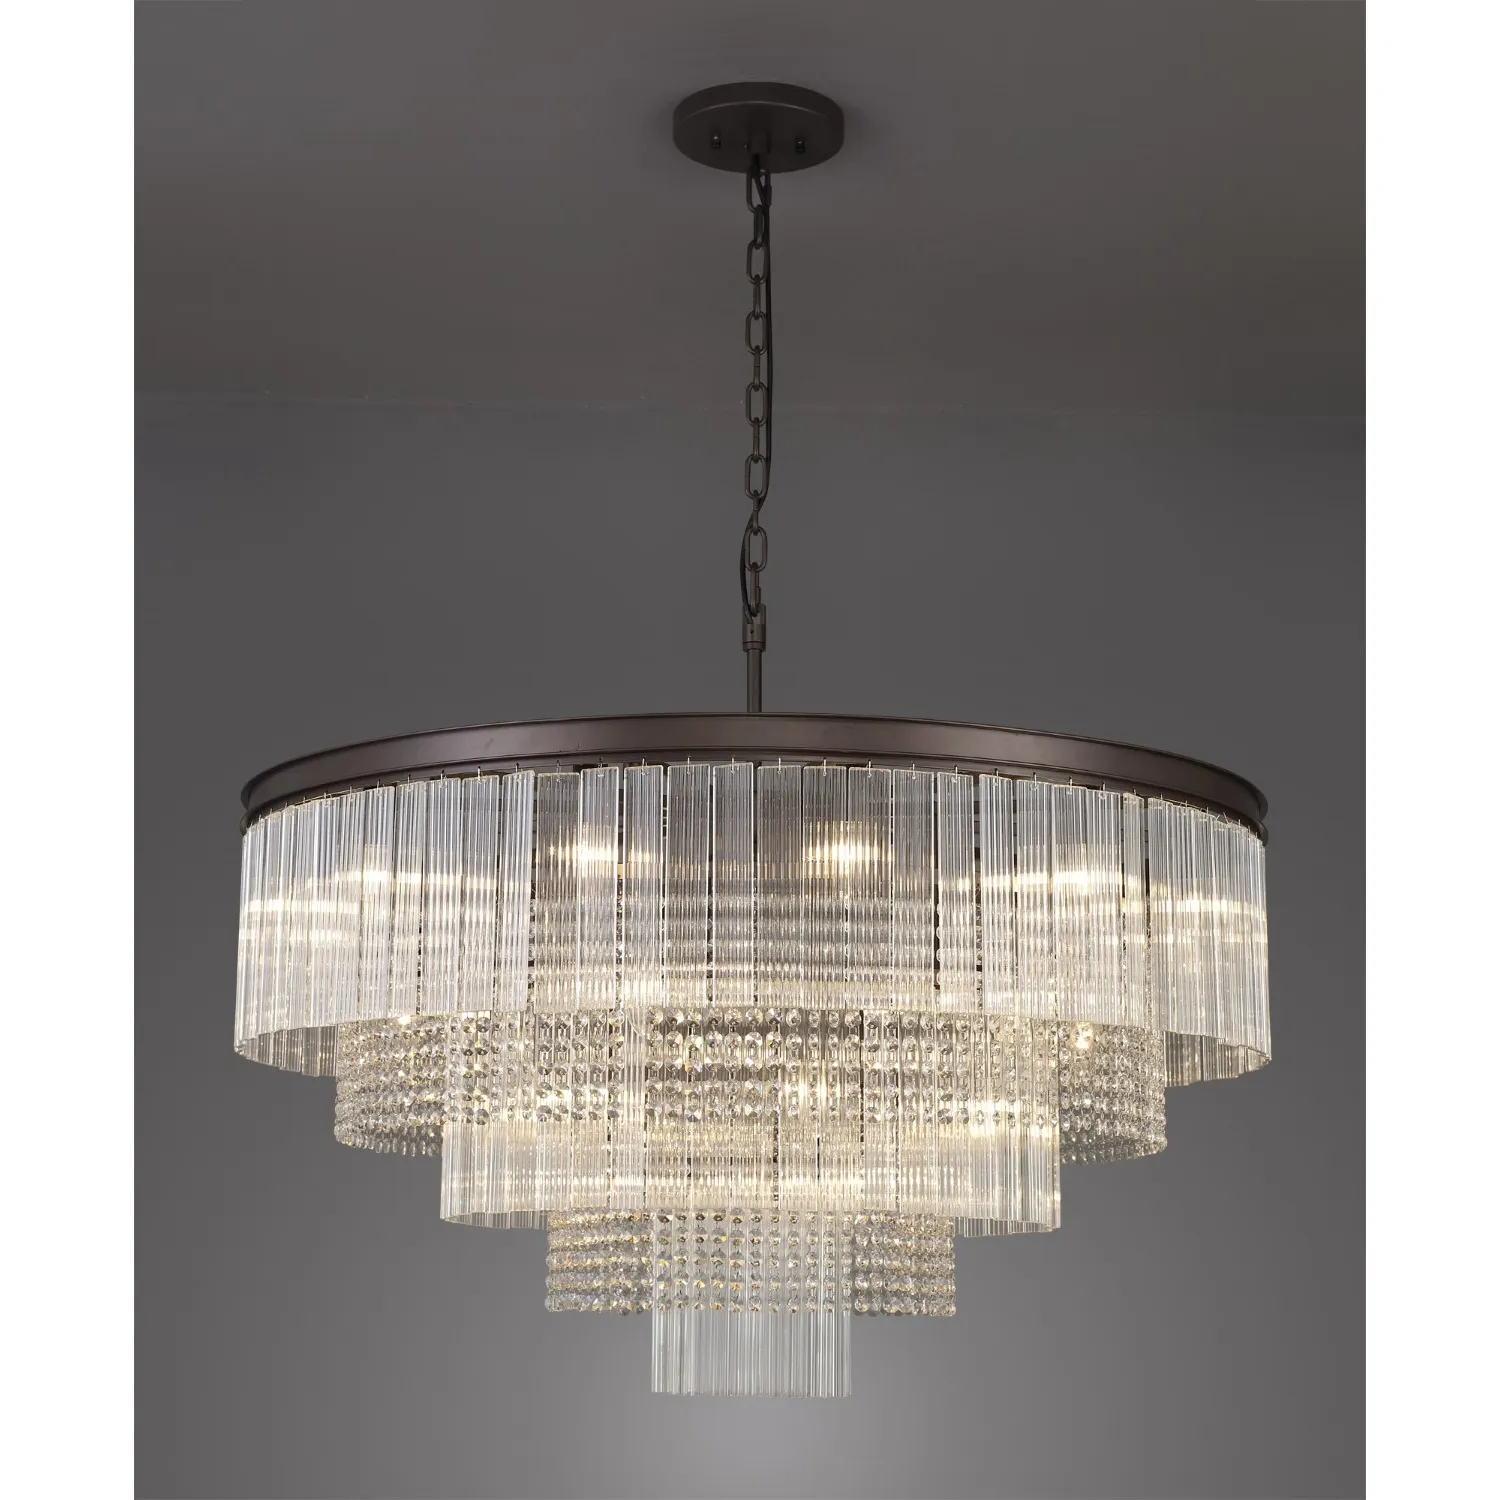 Greenwich Large 3 Tier Round Pendant, 27 Light E14, Brown Oxide, Item Weight: 28.6kg